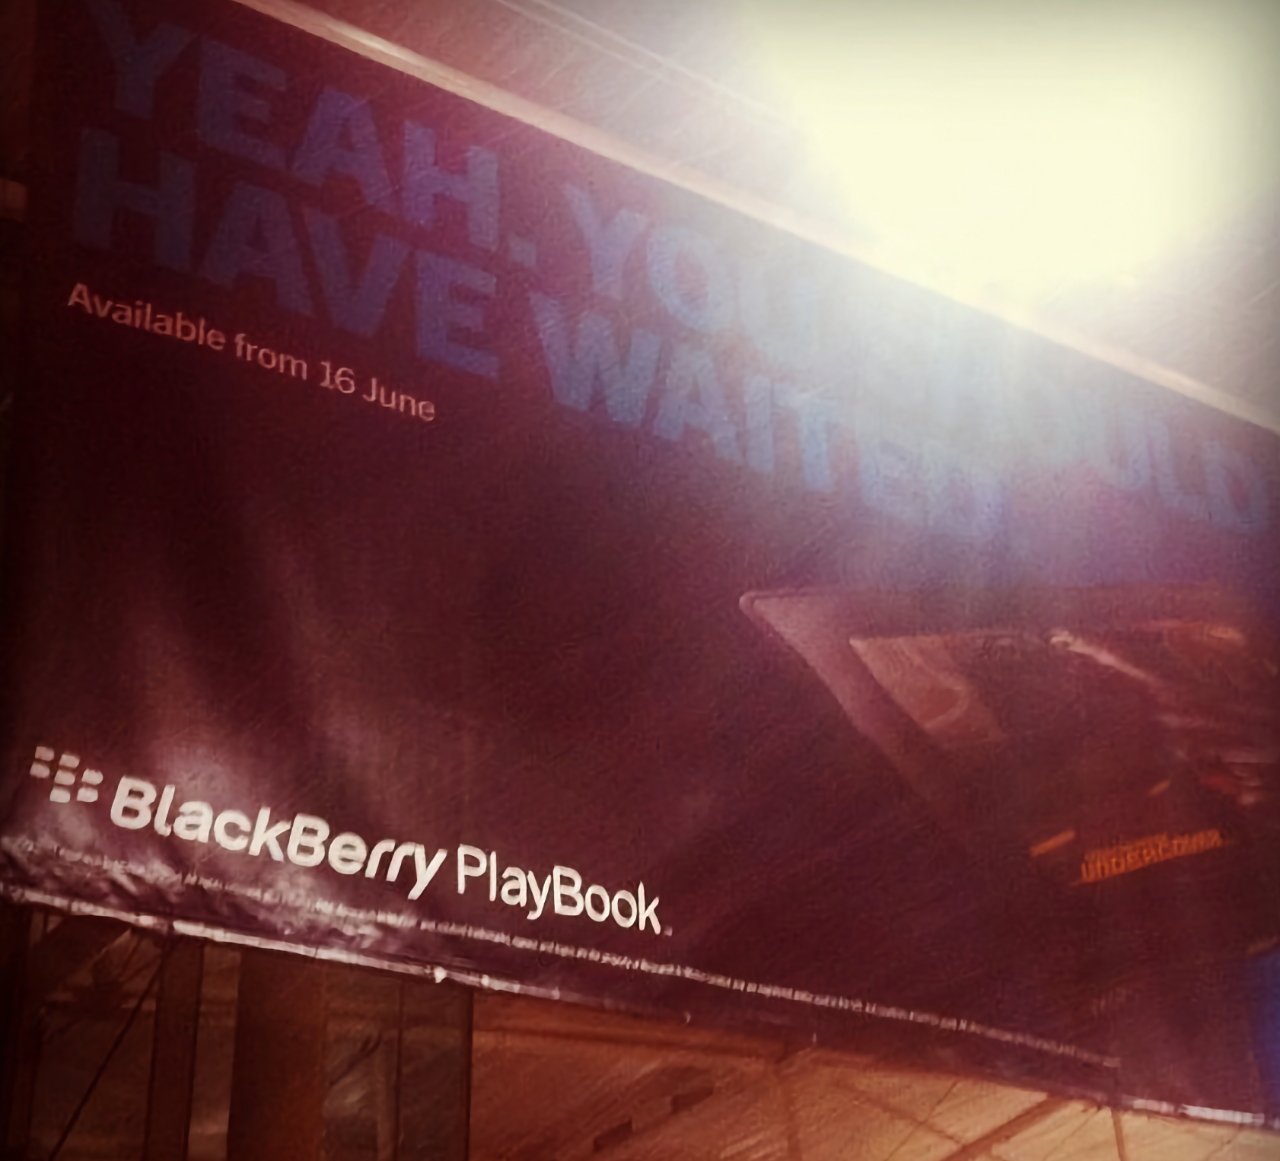 BlackBerry's painfully ill-advised ad for its disastrous Playbook. (Source: Mobile Industry Review)